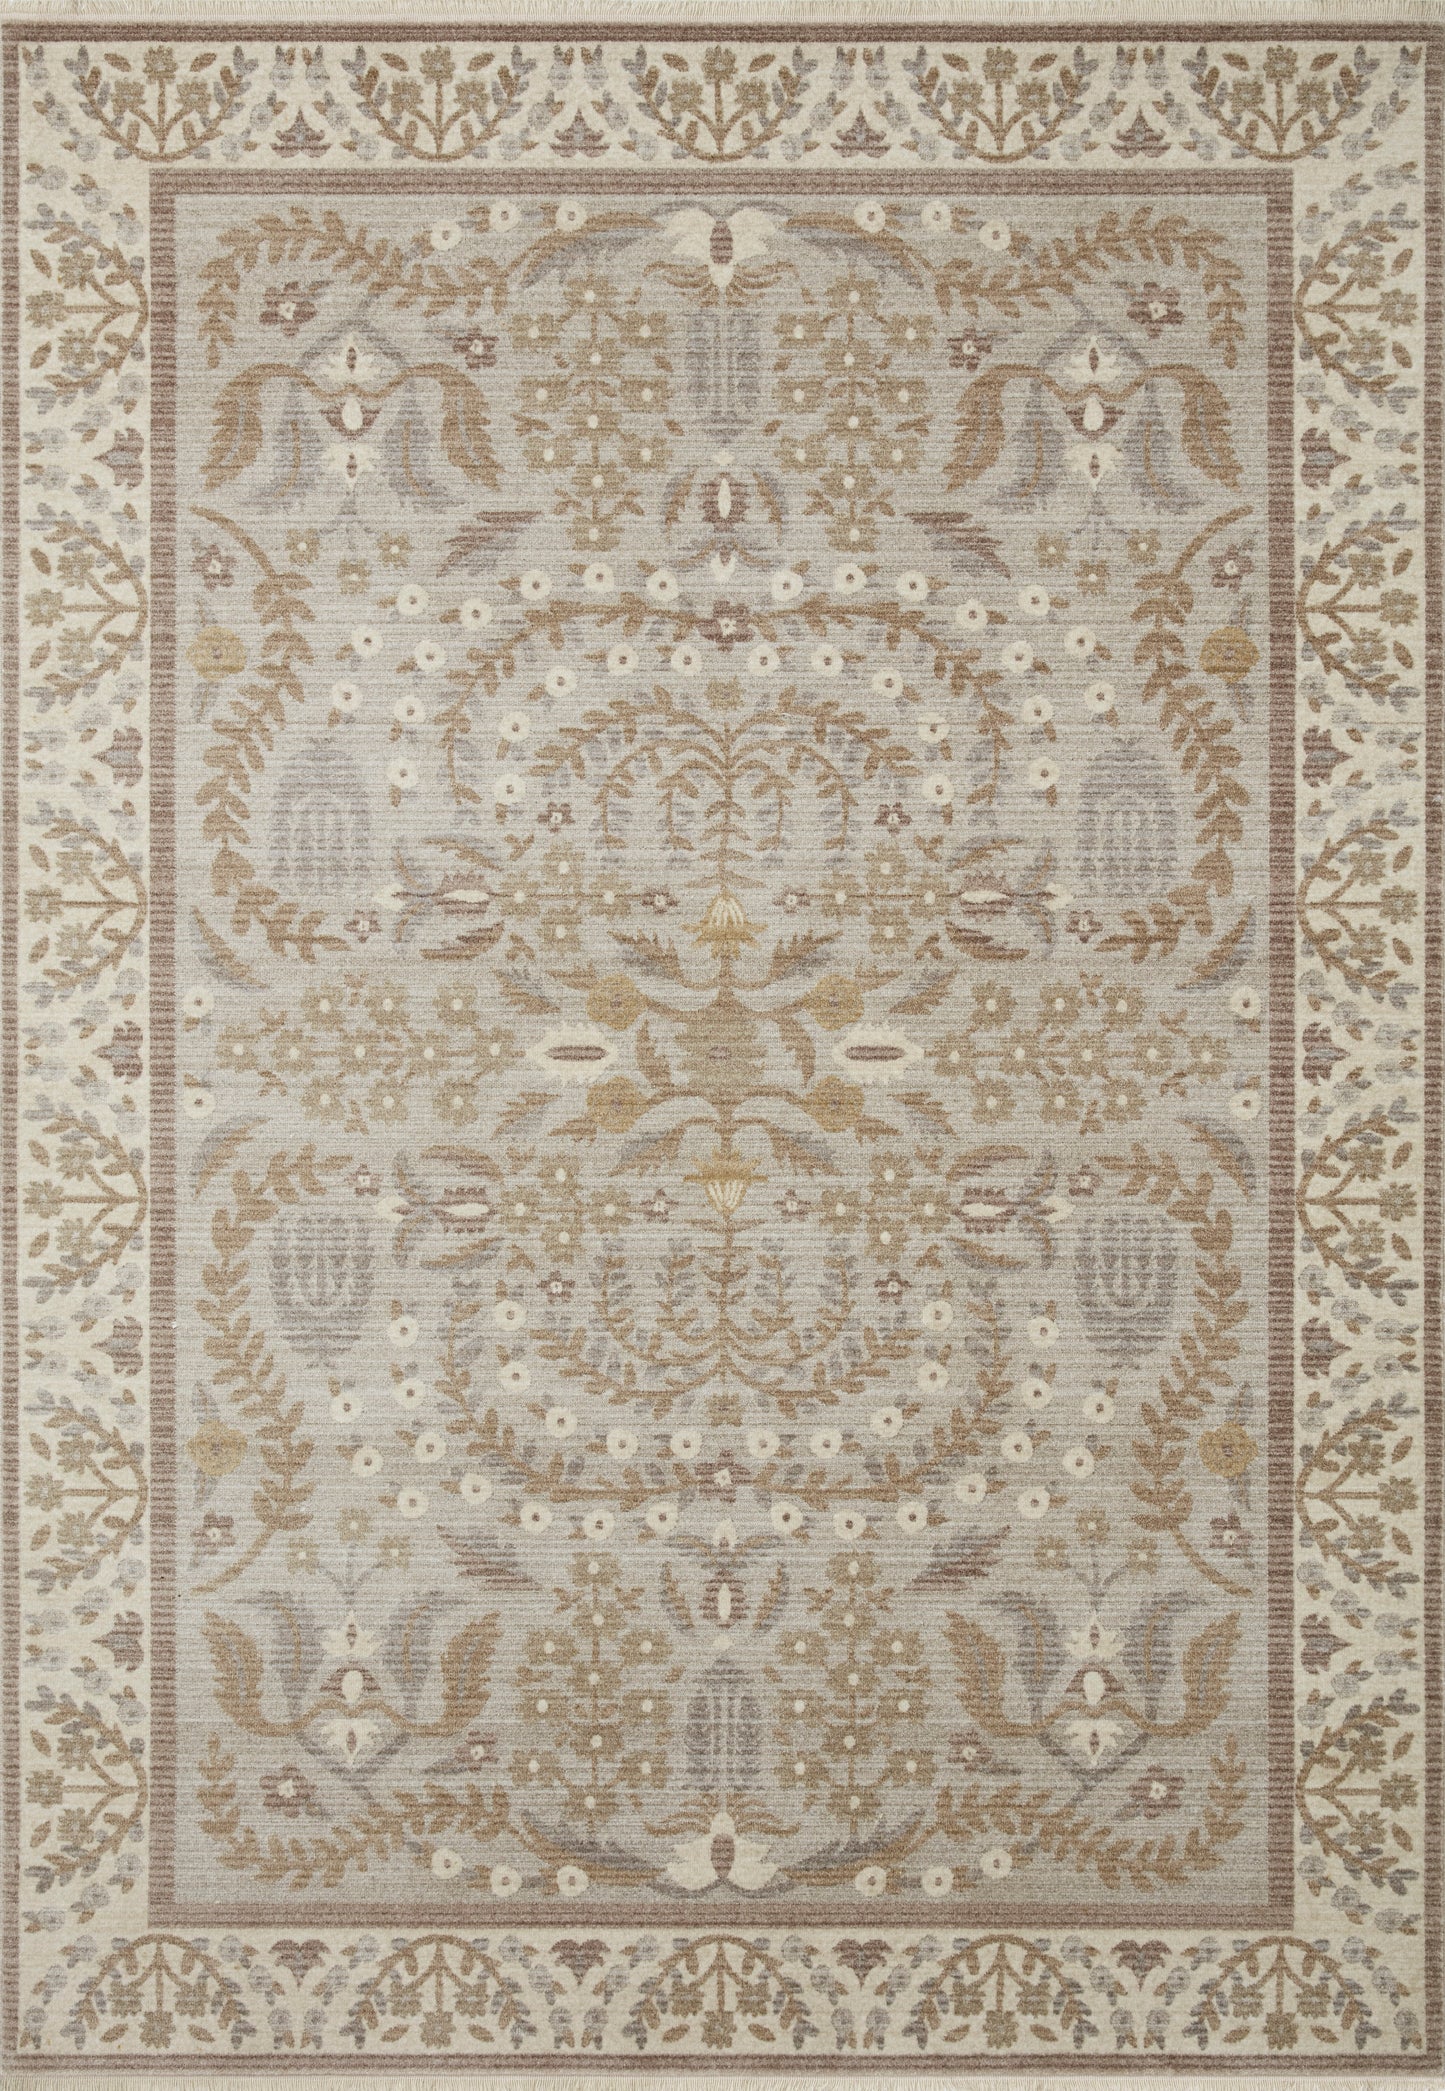 A picture of Loloi's Holland rug, in style HLD-04, color Camel